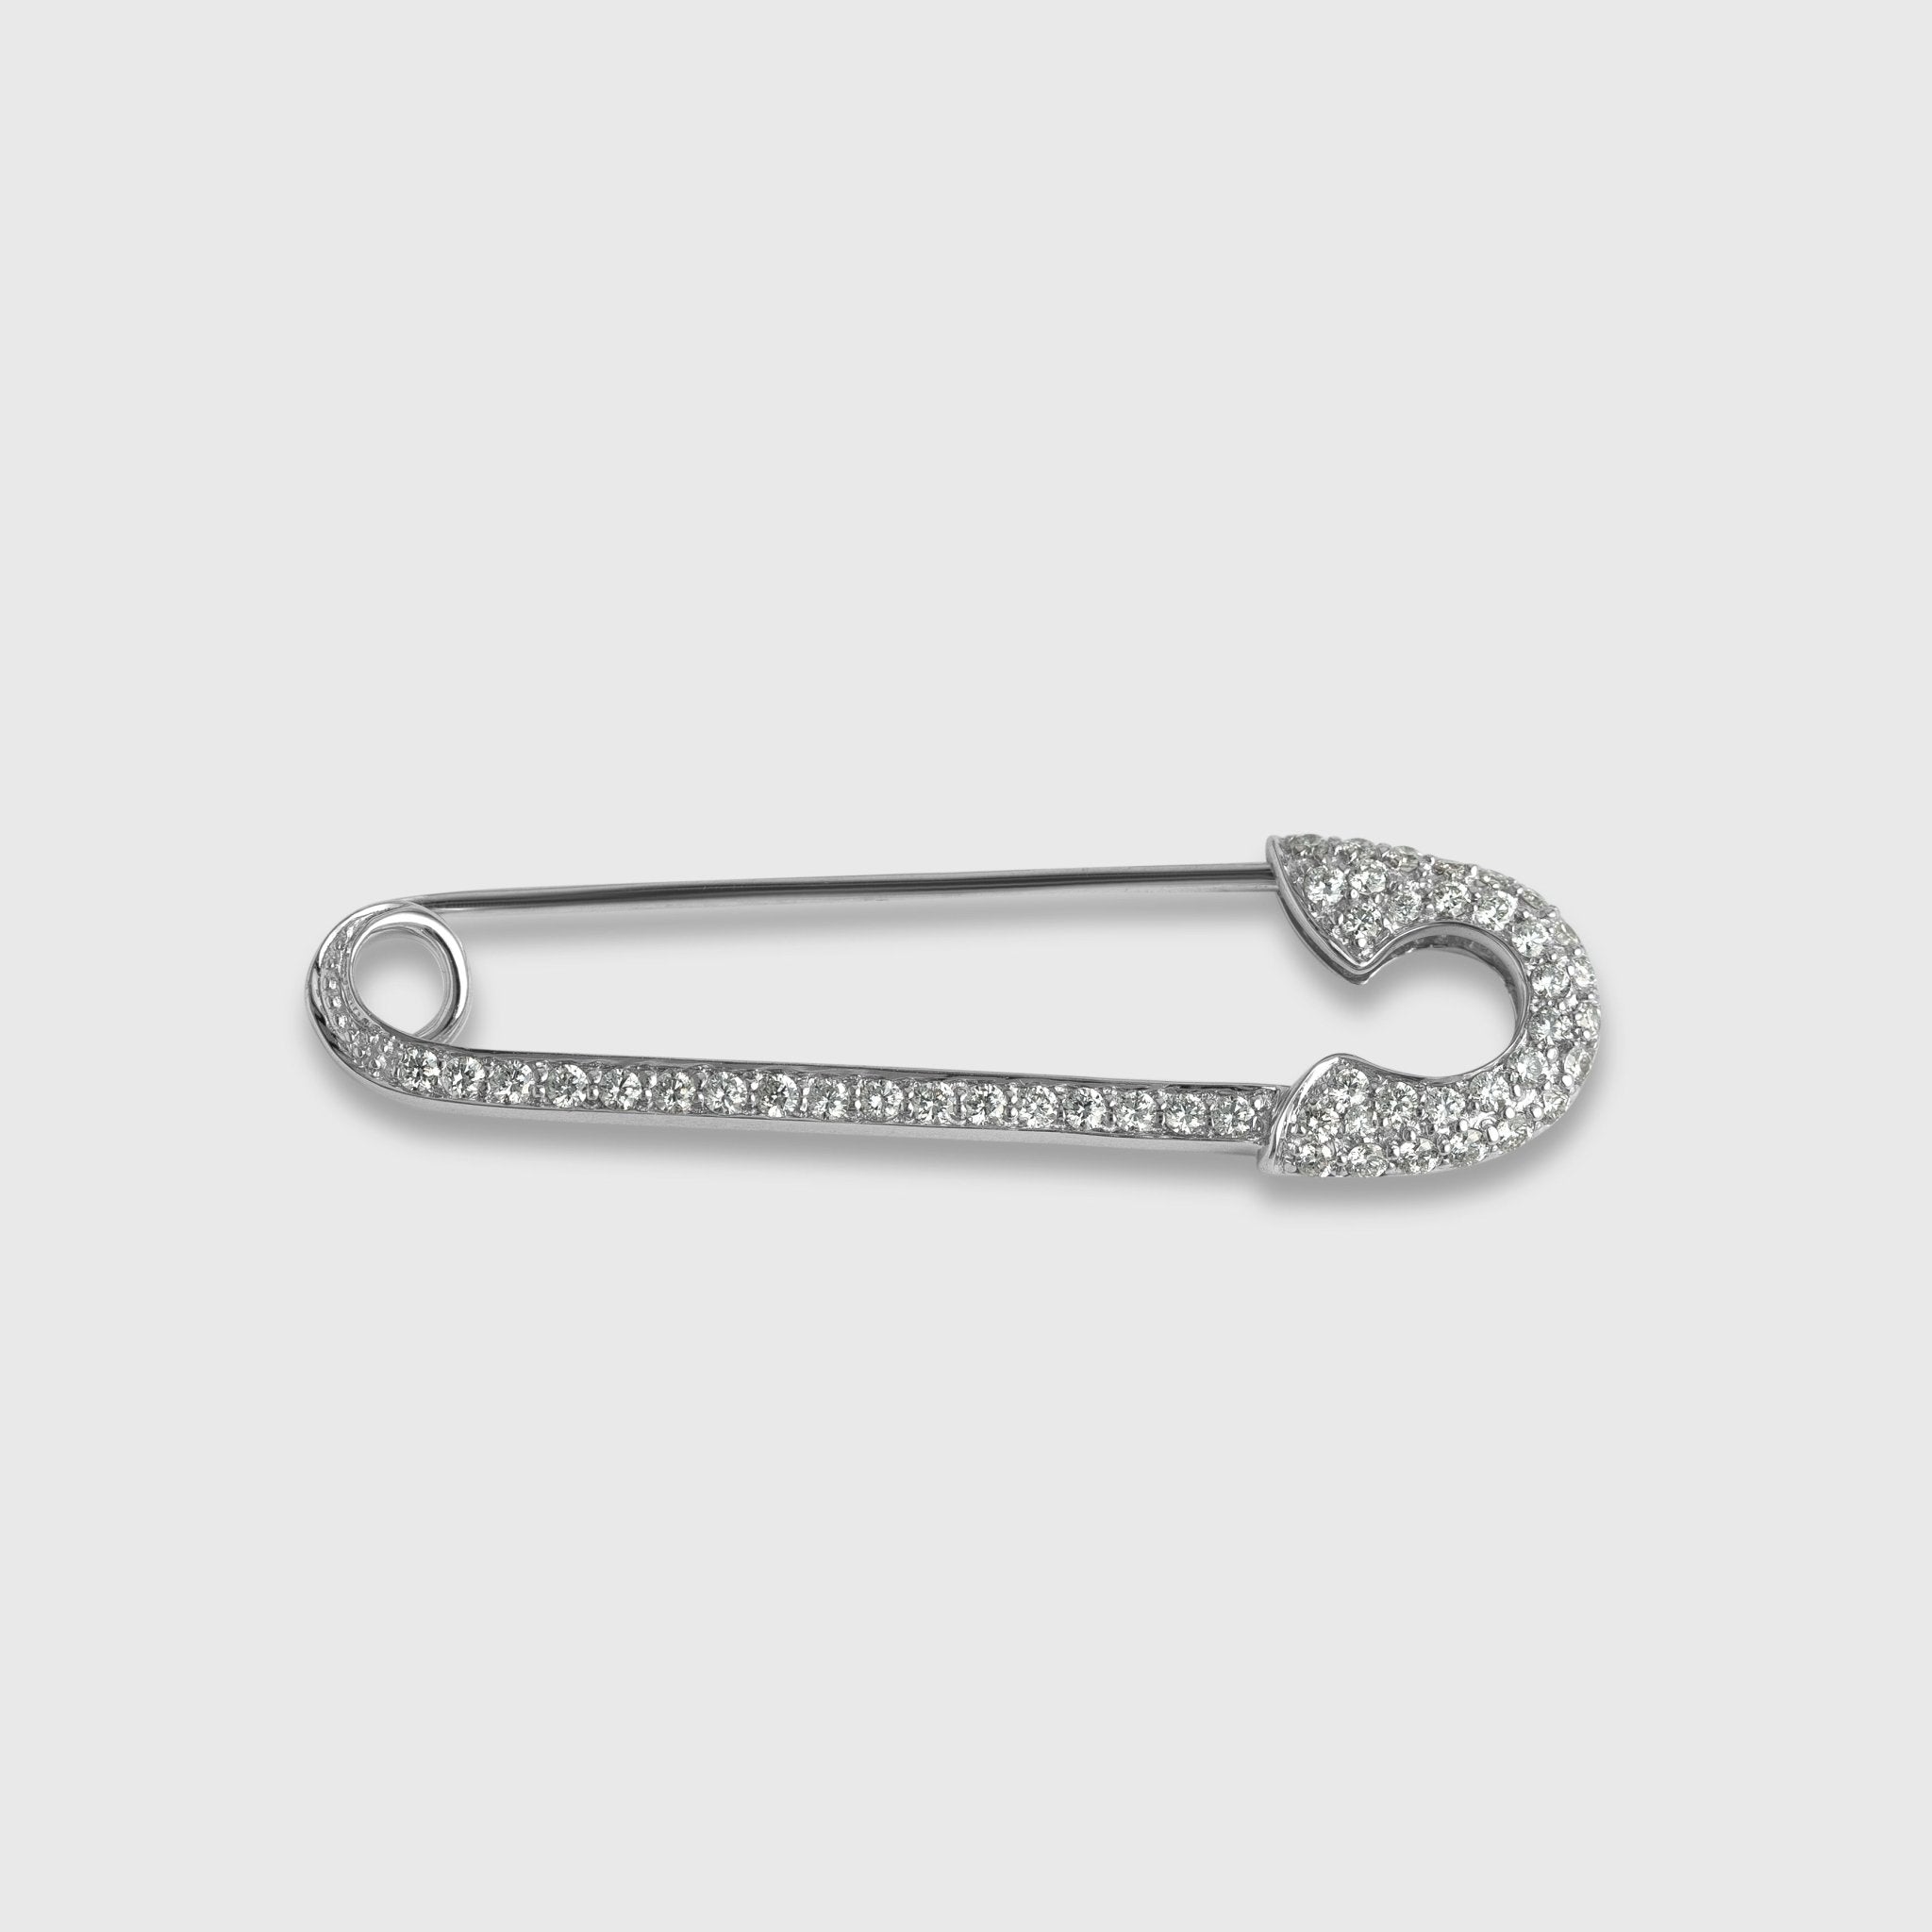 Silver brooch with white stones in safety pin design silver